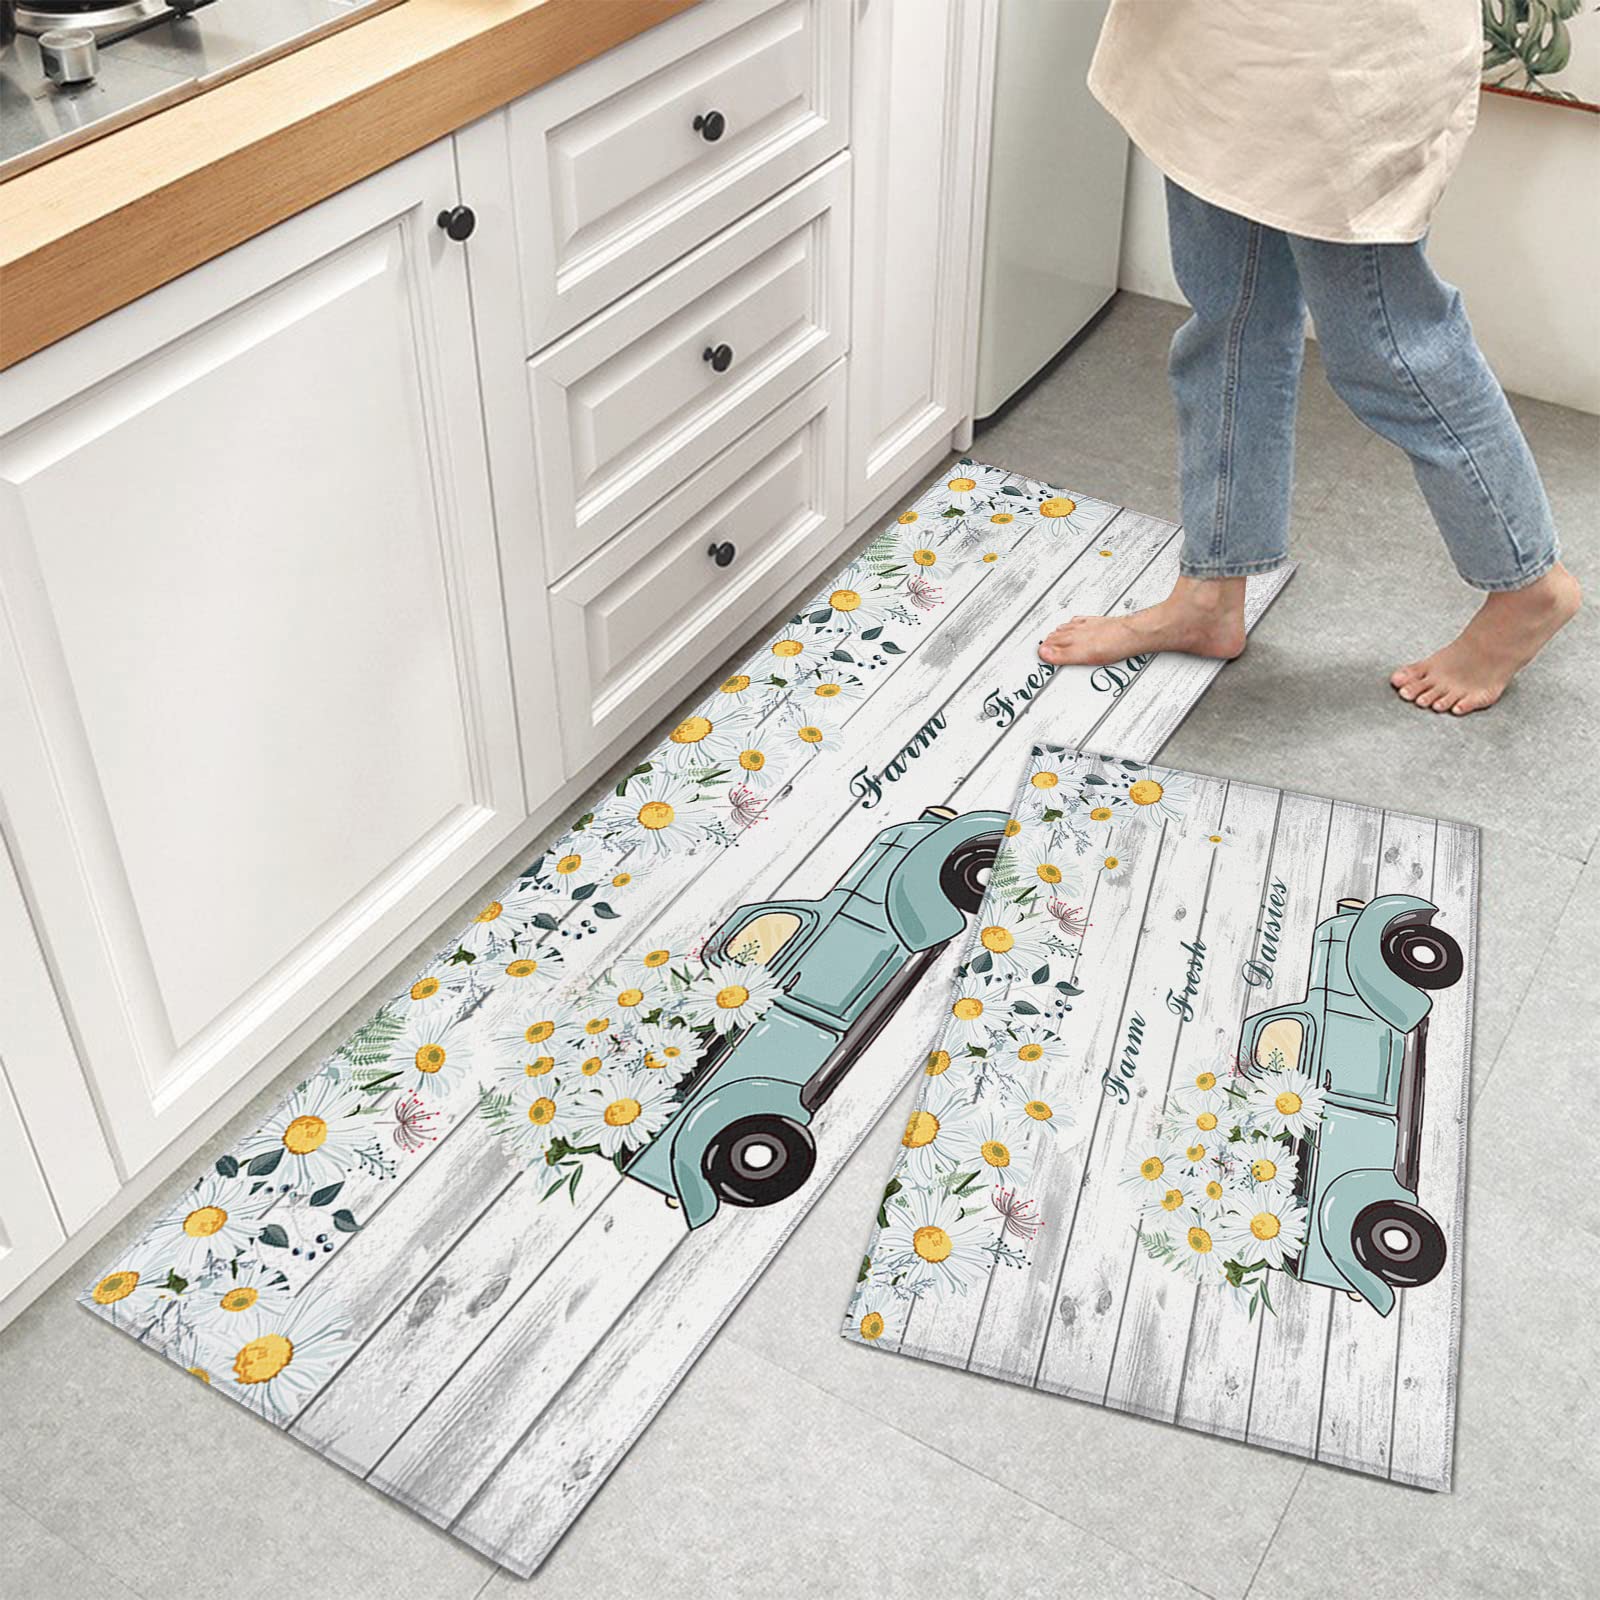 Kitchen Rugs and Mats Sets of 2 Truck Daisy Flower Non-Slip Rubber Backing Area Rugs Washable Runner Carpets for Floor, Kitchen Wild Floral Fresh Design Farmhouse Plank 15.7x23.6+15.7x47.2inch